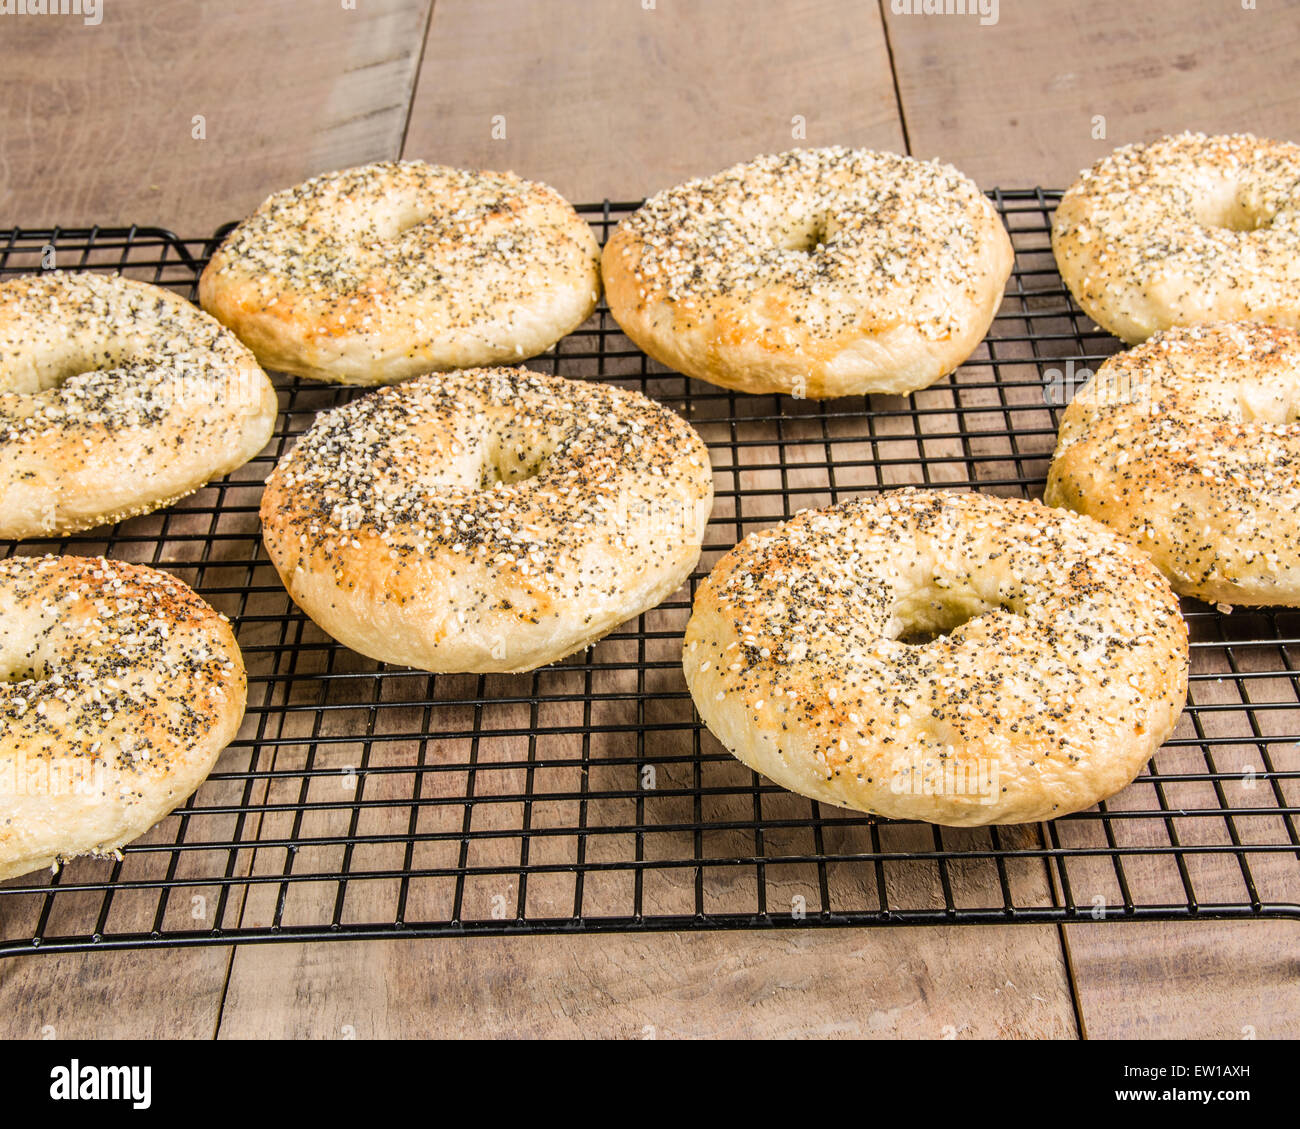 Bagels just baked and placed on cooling rack Stock Photo